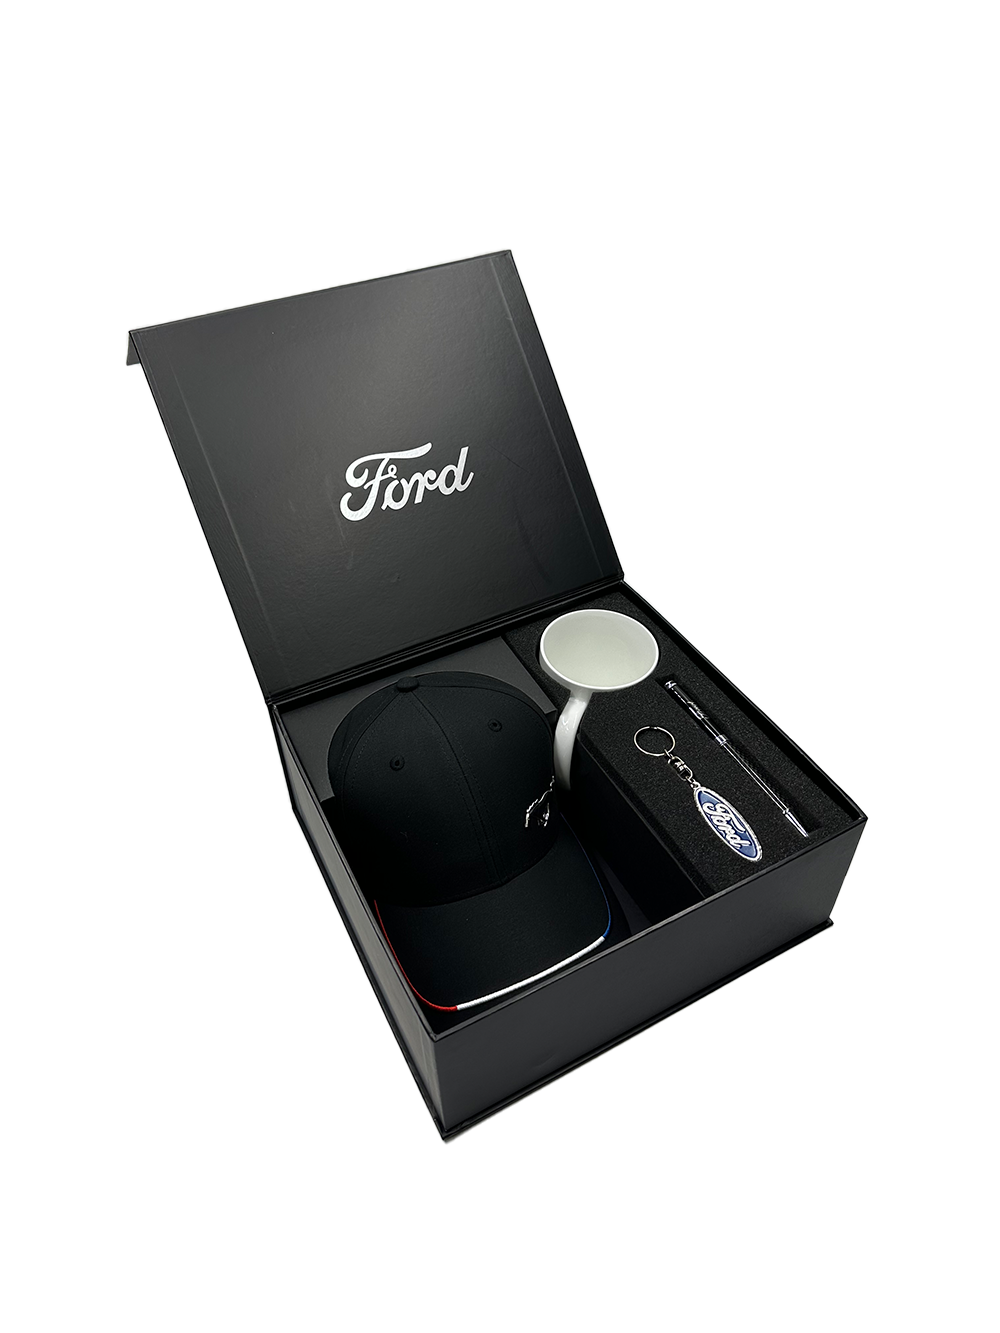 FORD MUSTANG GIFT BOX